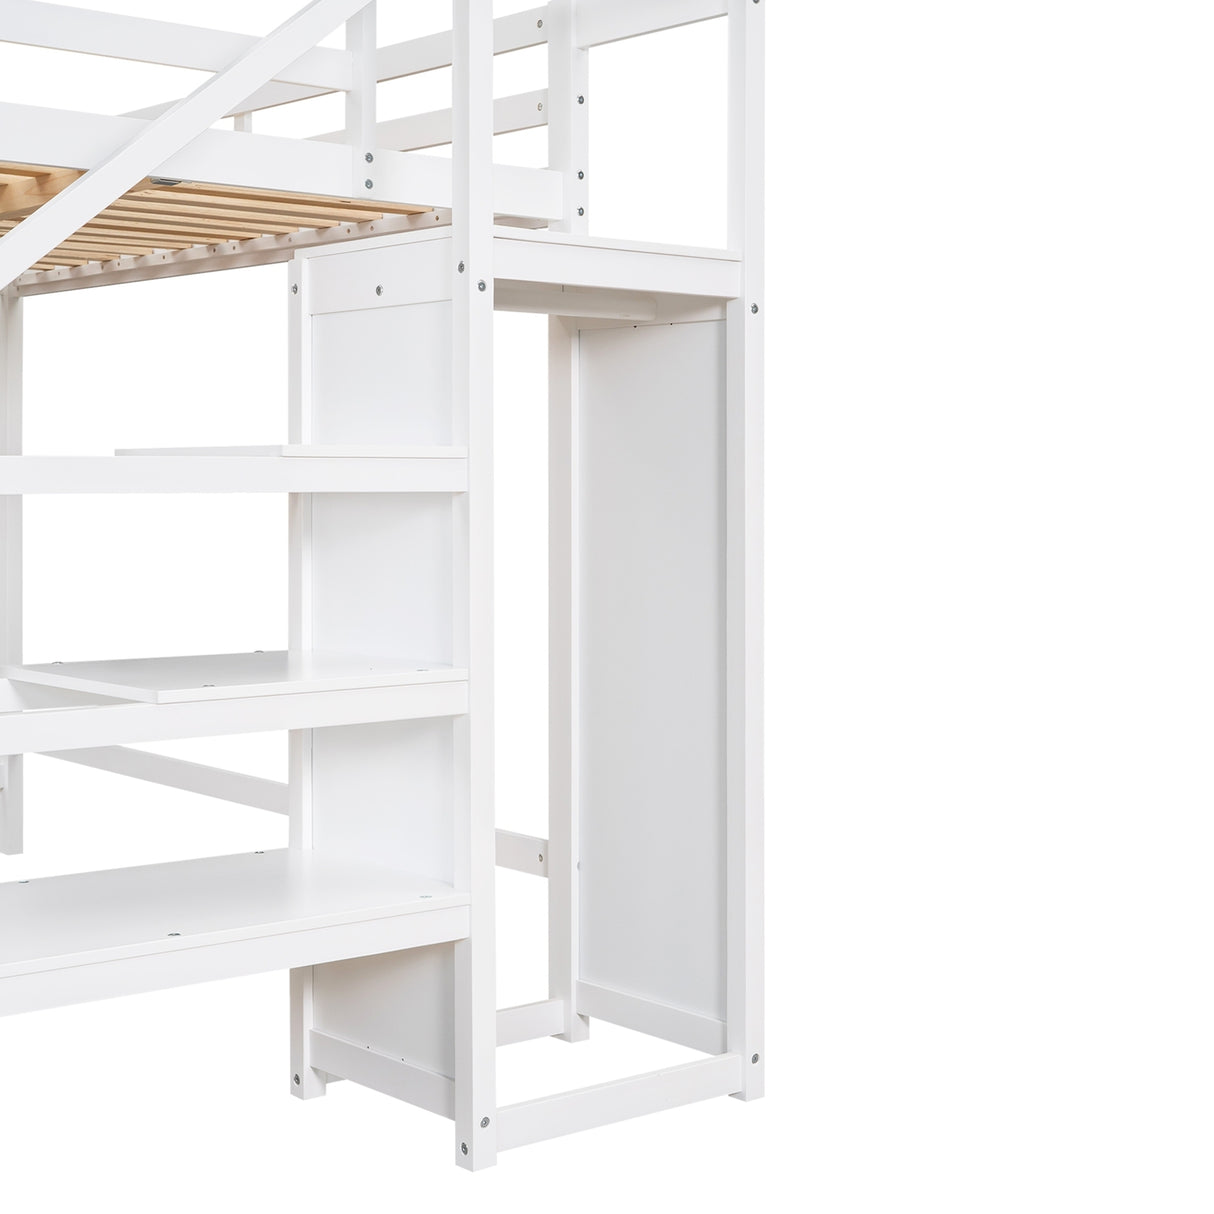 Full Size Loft Bed with Built-in Storage Wardrobe and Staircase,White - Home Elegance USA